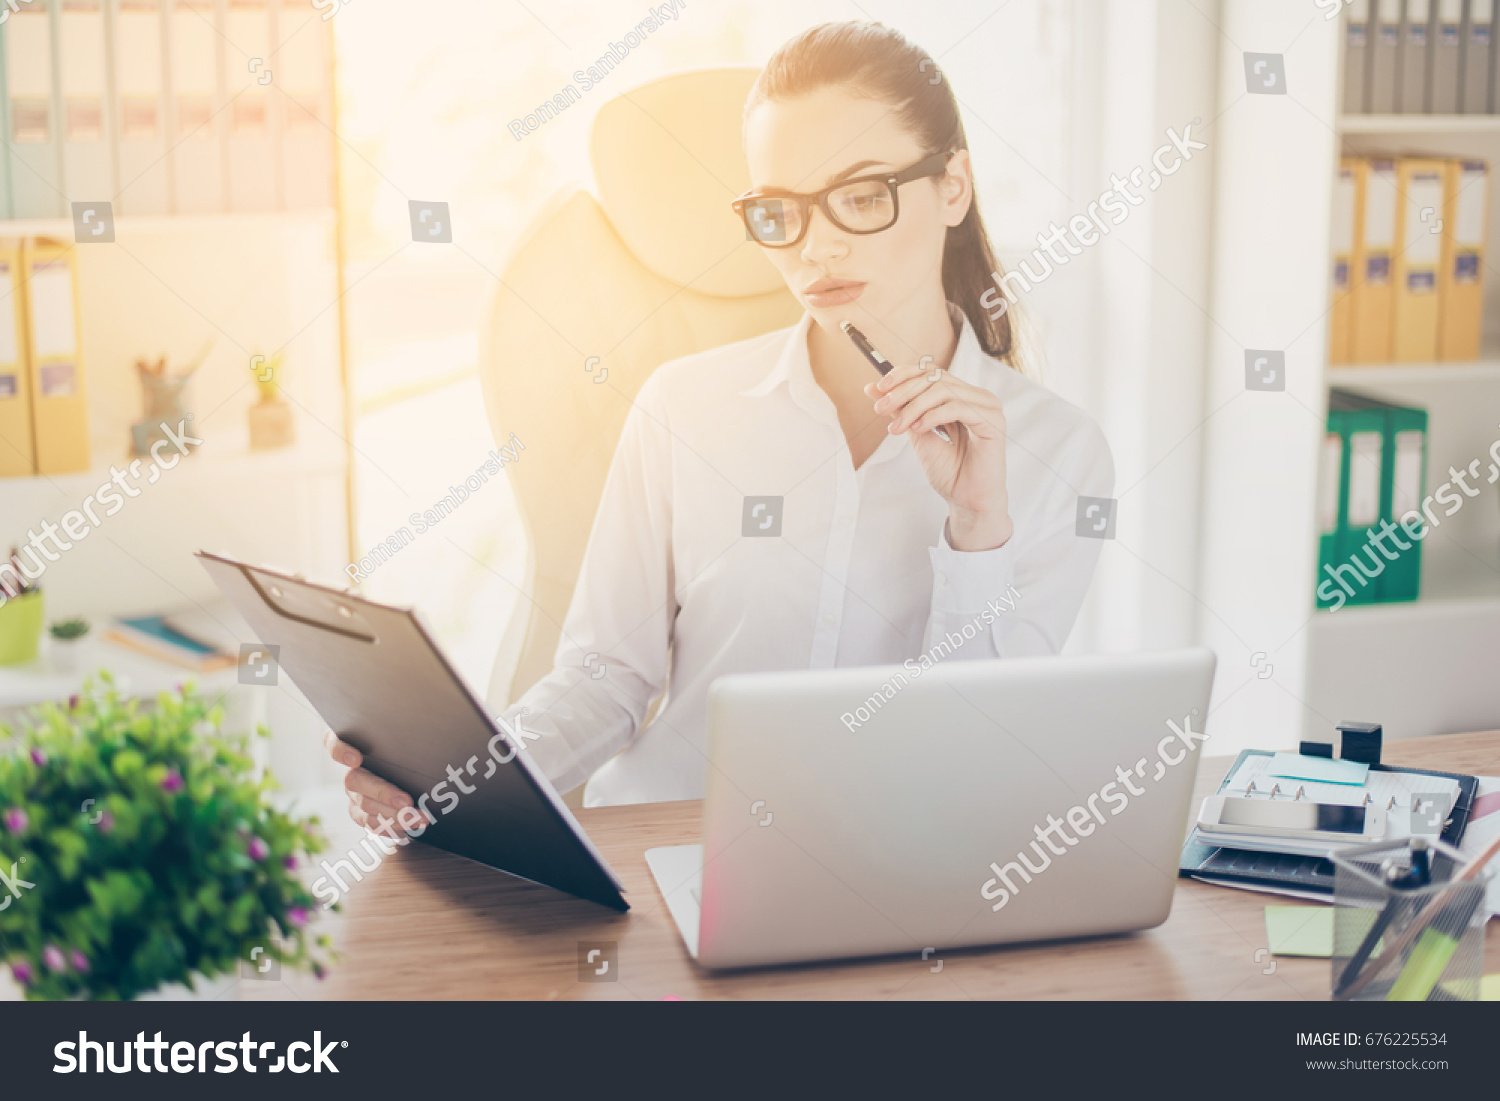 Portrait of serious young businesswoman in formal wear, sitting at her work place and concentrated on data from report in the clip board #676225534